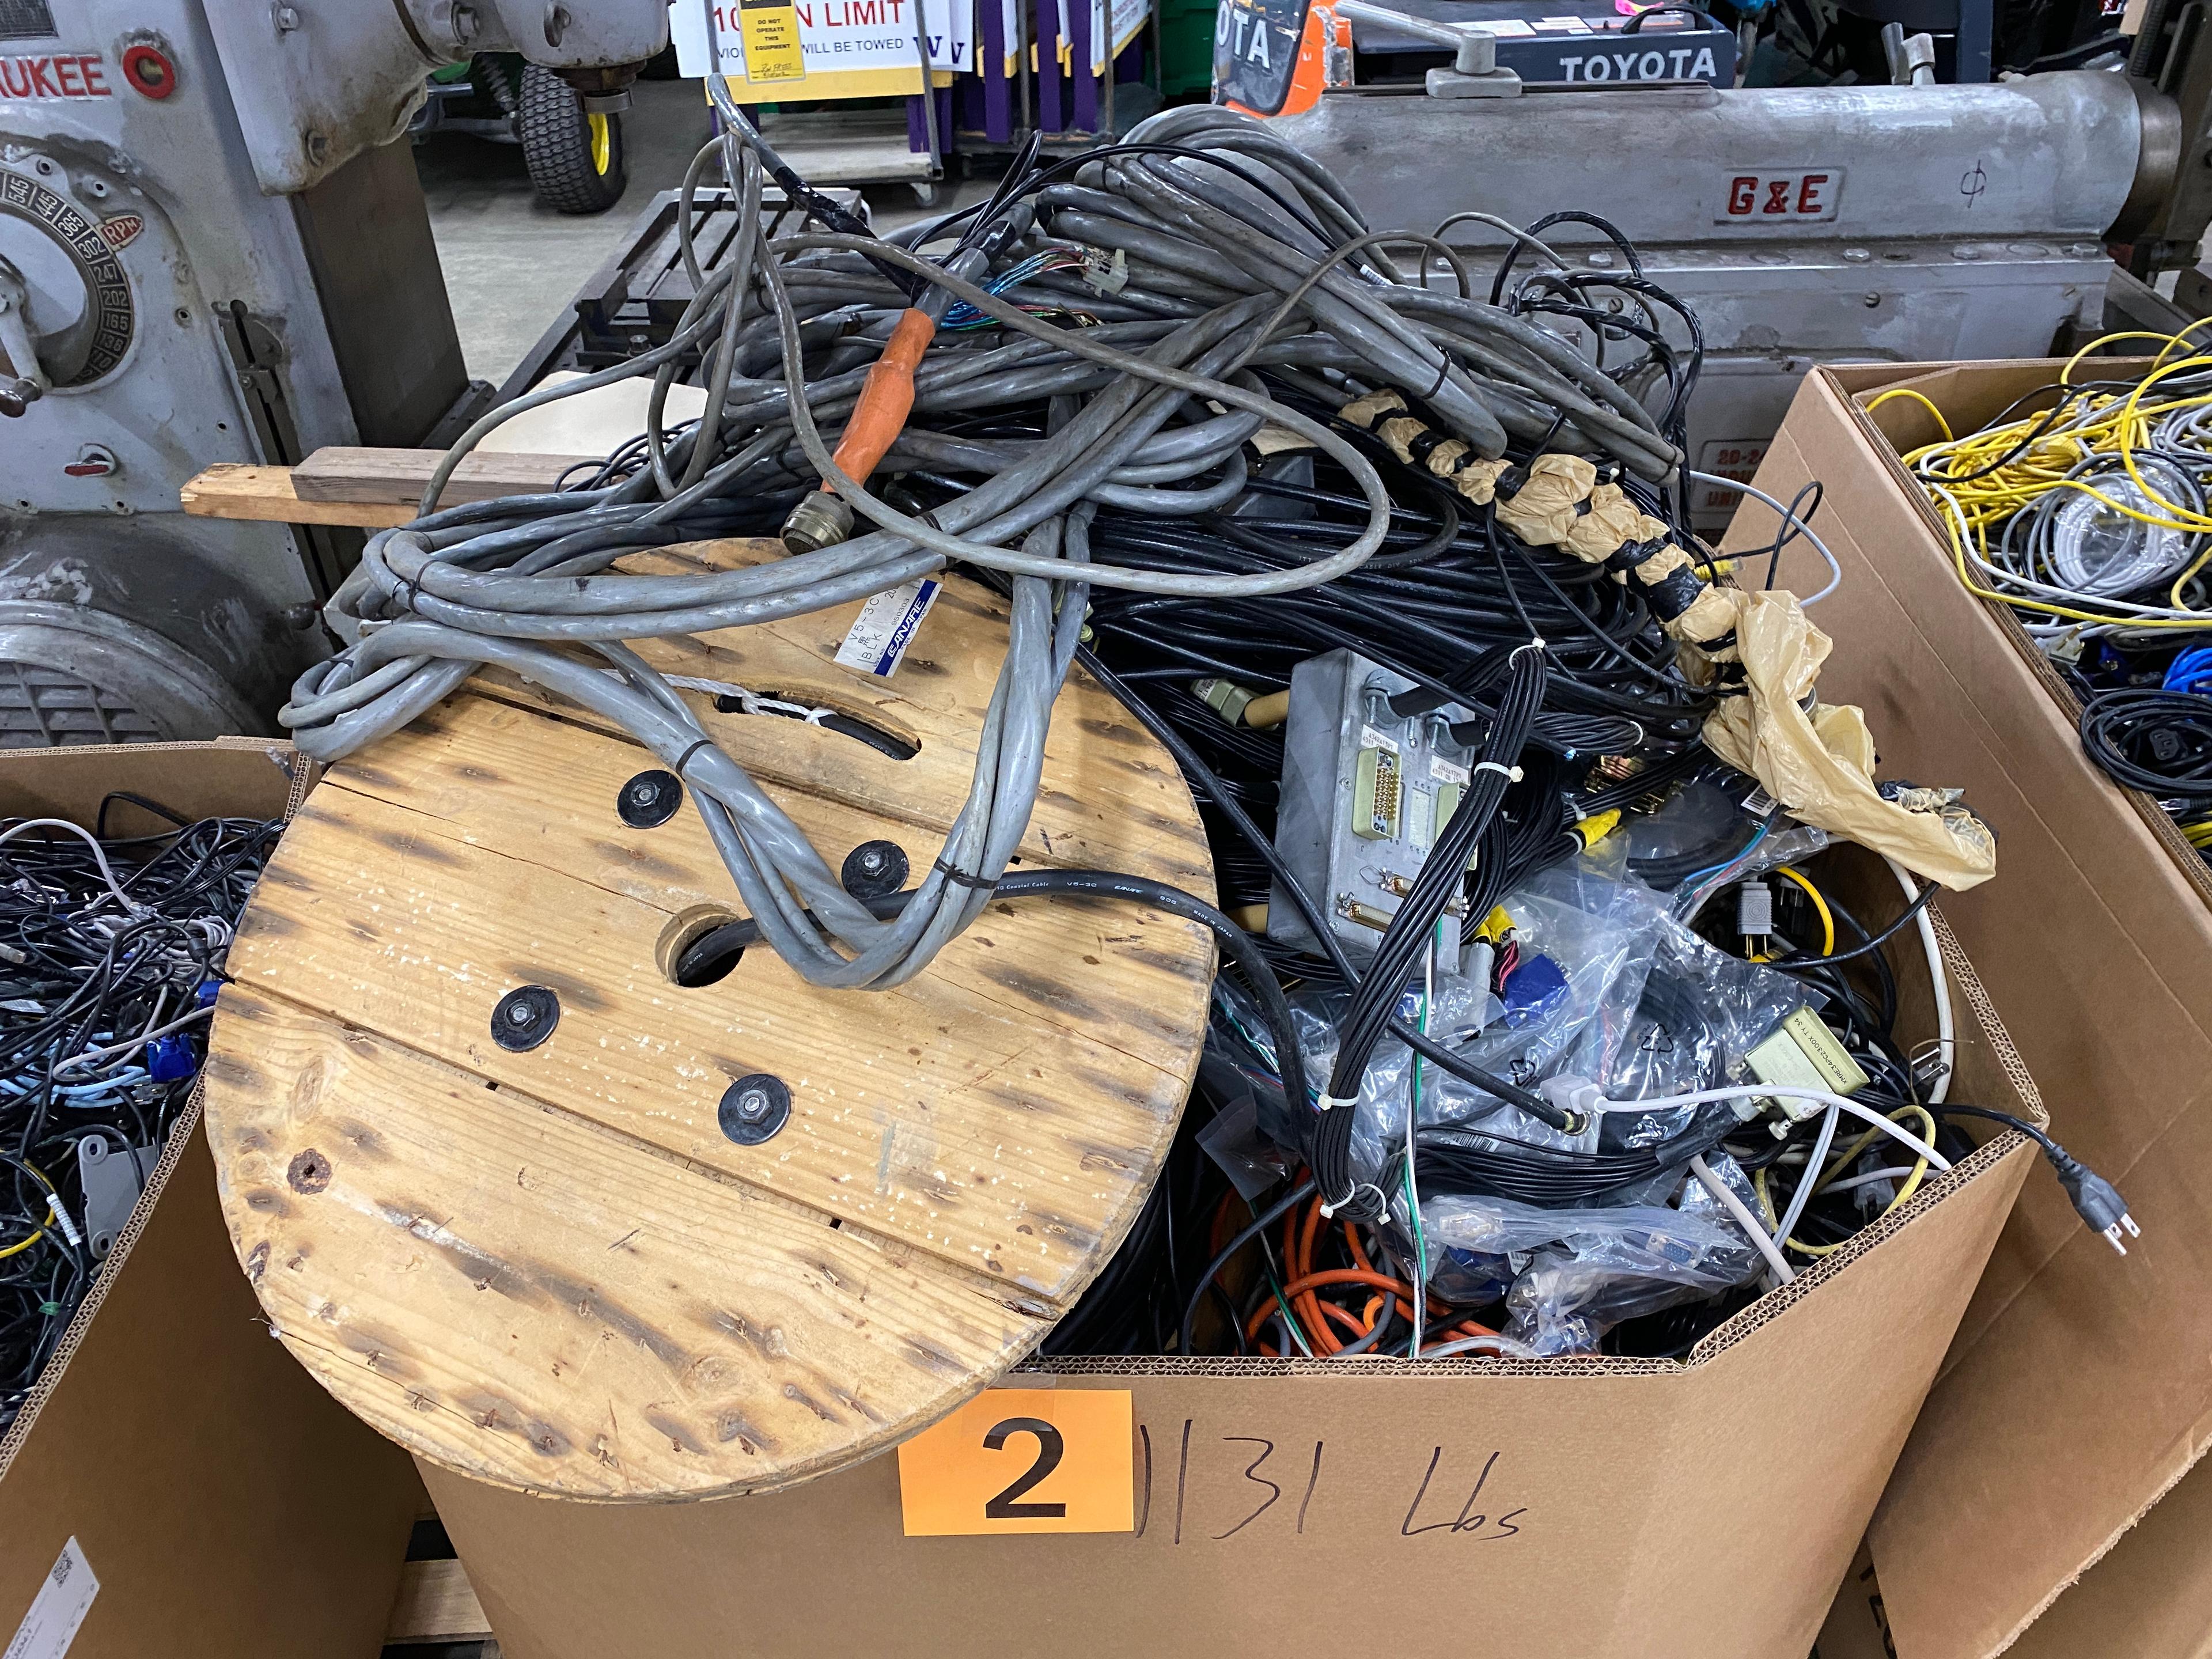 Misc. Cords & Cables: 2 Gaylords, Approx. 2200 Lbs. Gross Wt.